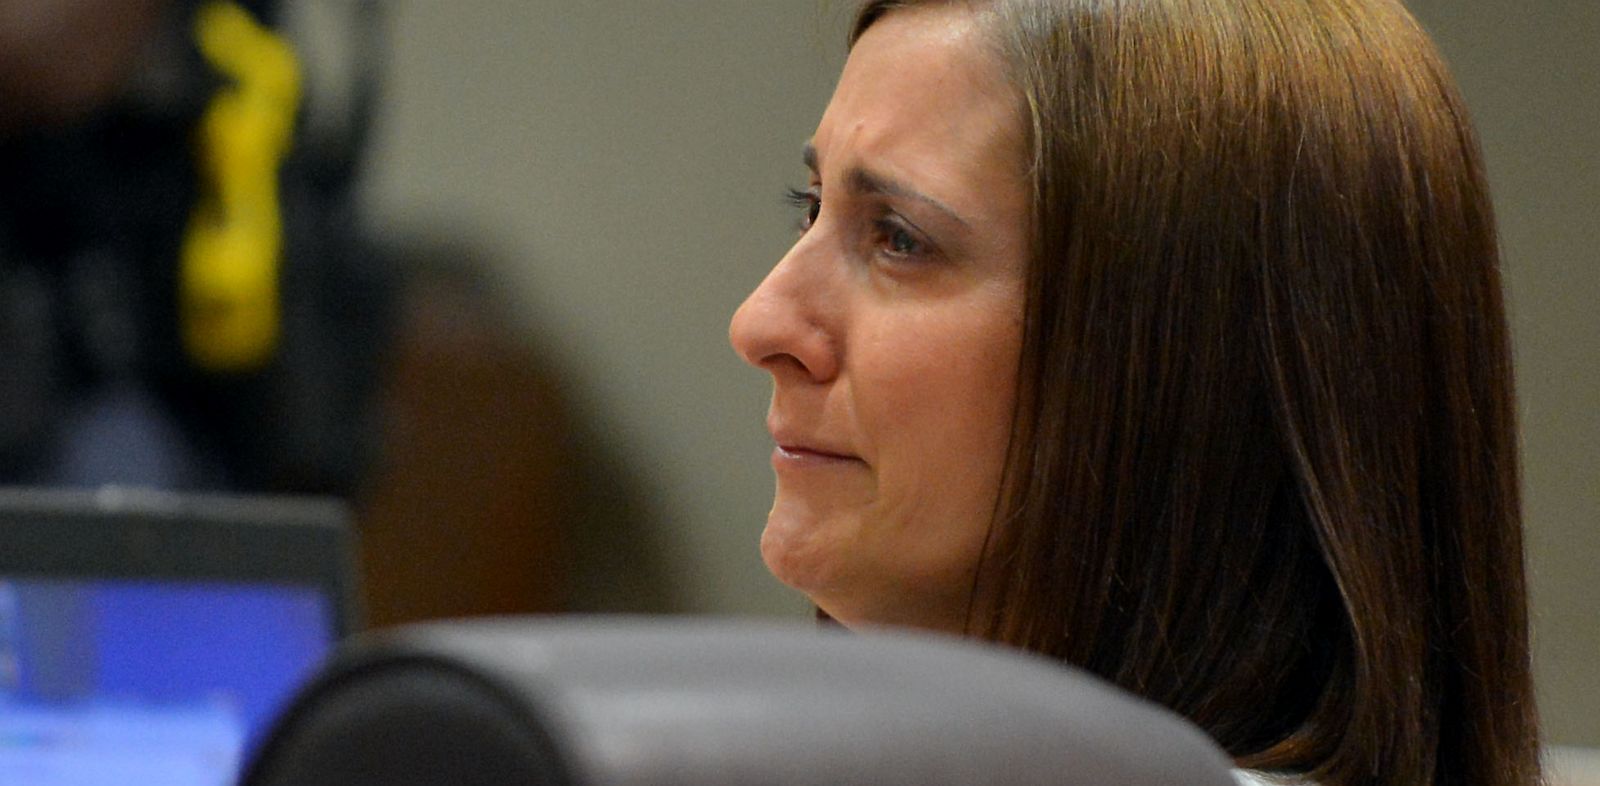 Andrea Sneiderman Trial Victim's Wife Accused of Lying About Affair